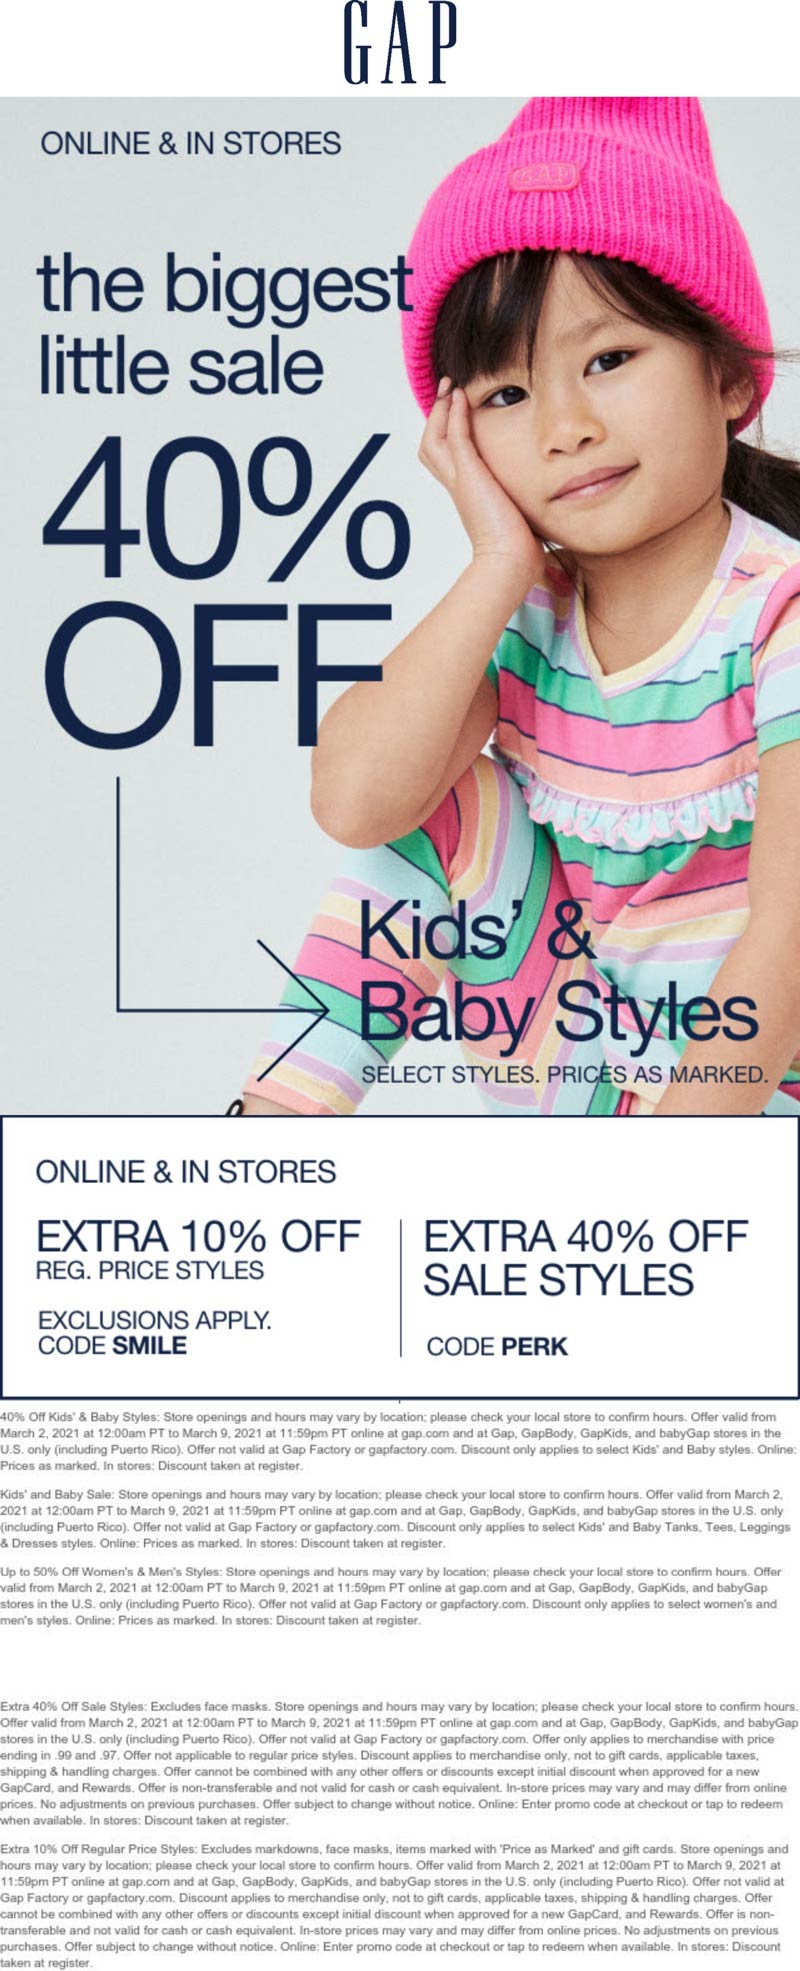 Gap stores Coupon  Extra 40% off sale styles & more at Gap, or online via promo code PERK #gap 